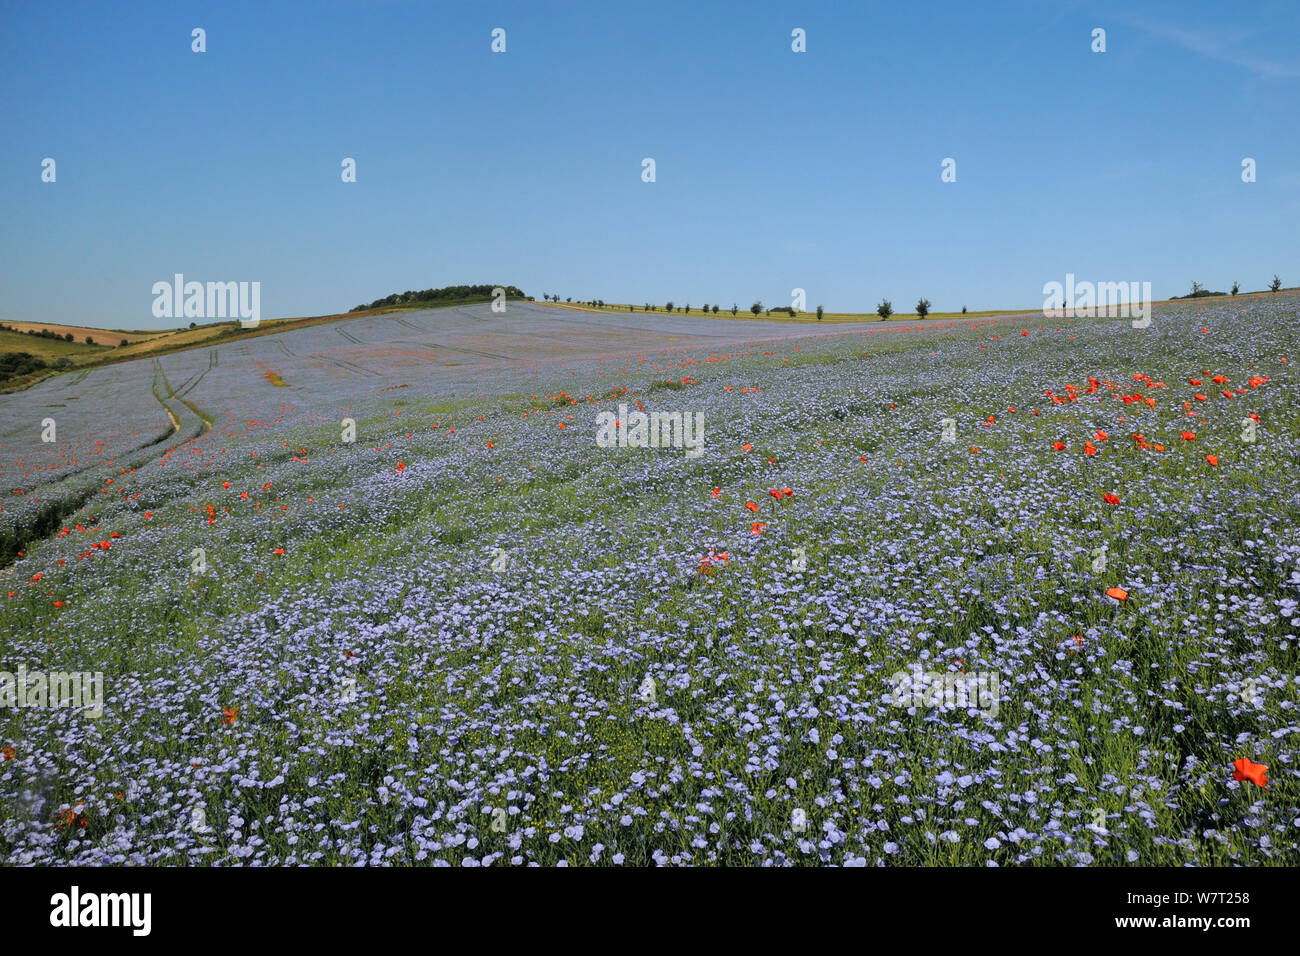 Flowering Linseed crop (Linum usitatissimum) dotted with Common poppies (Papaver rhoeas) with the Ridgeway in the background, Marlborough Downs farmland, Wiltshire, UK, July. Stock Photo